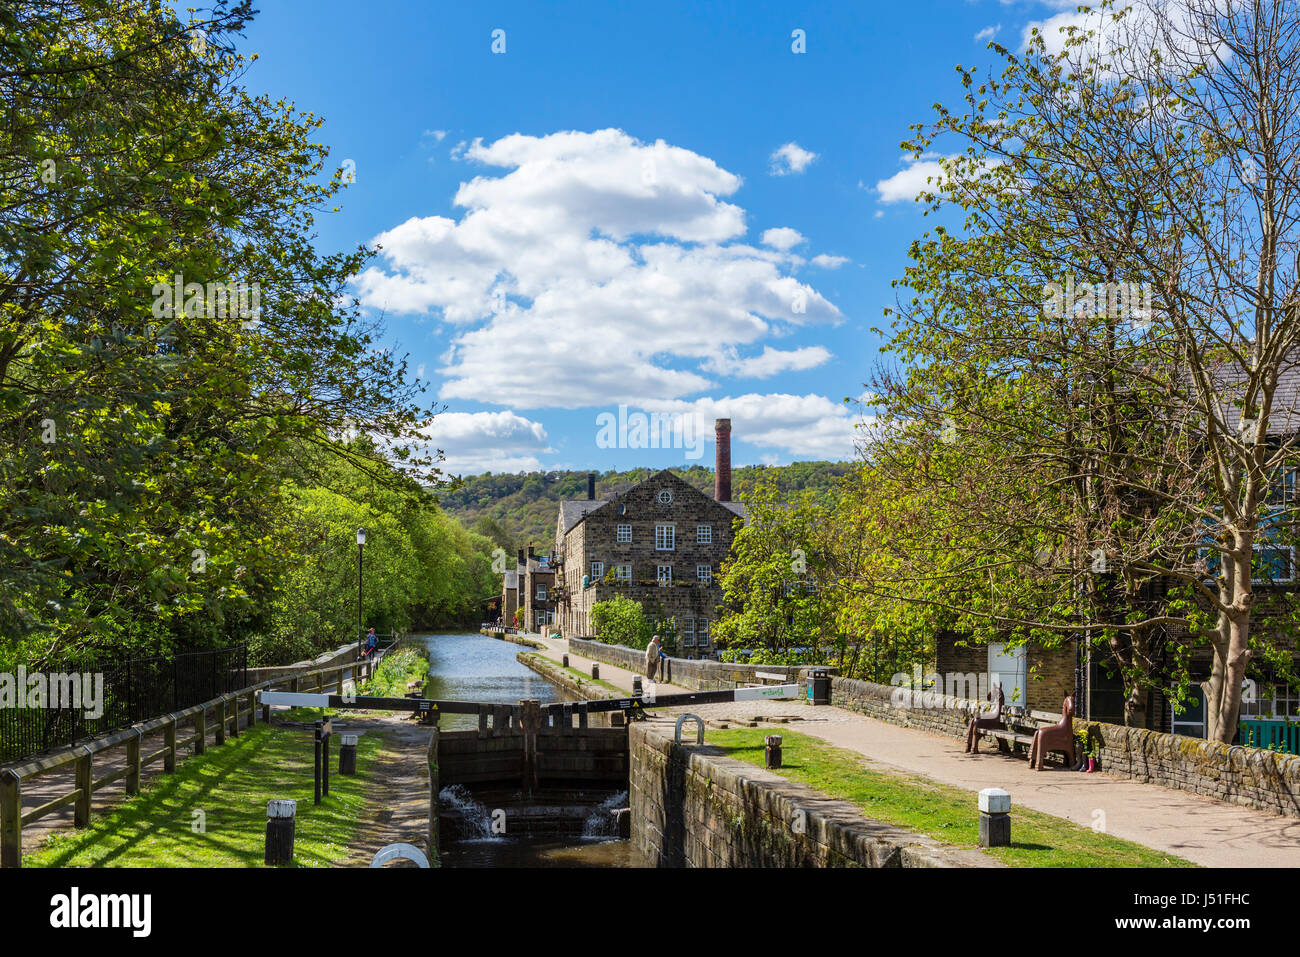 Lock on the Rochdale Canal, Hebden Bridge, West Yorkshire, England, UK. Stock Photo